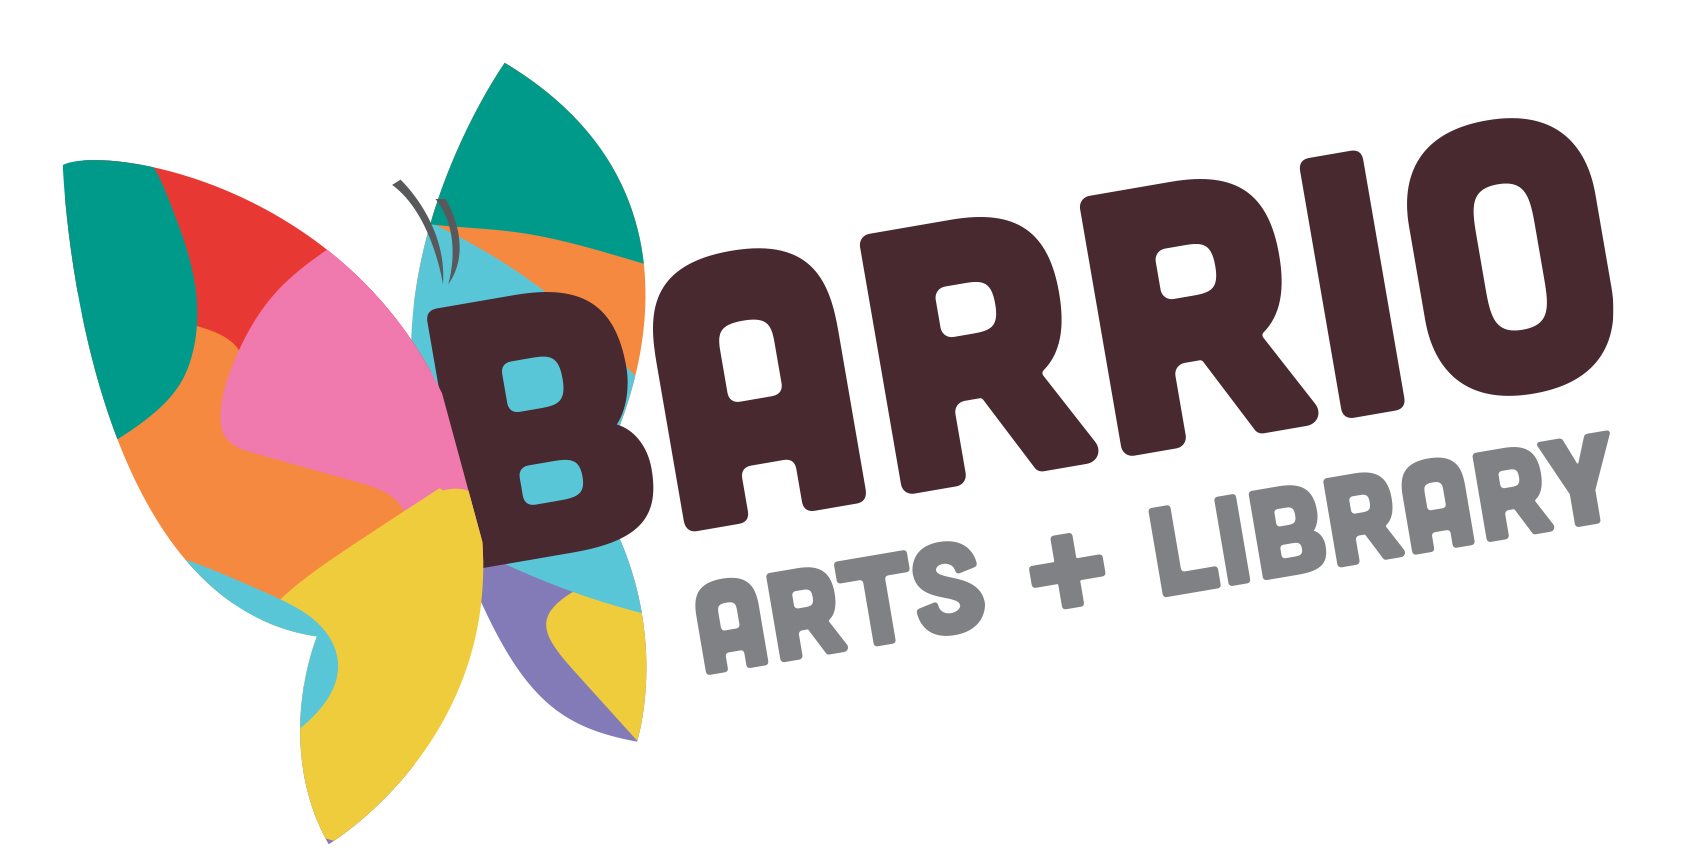 Butterfly logo with Barrio Arts and Library.